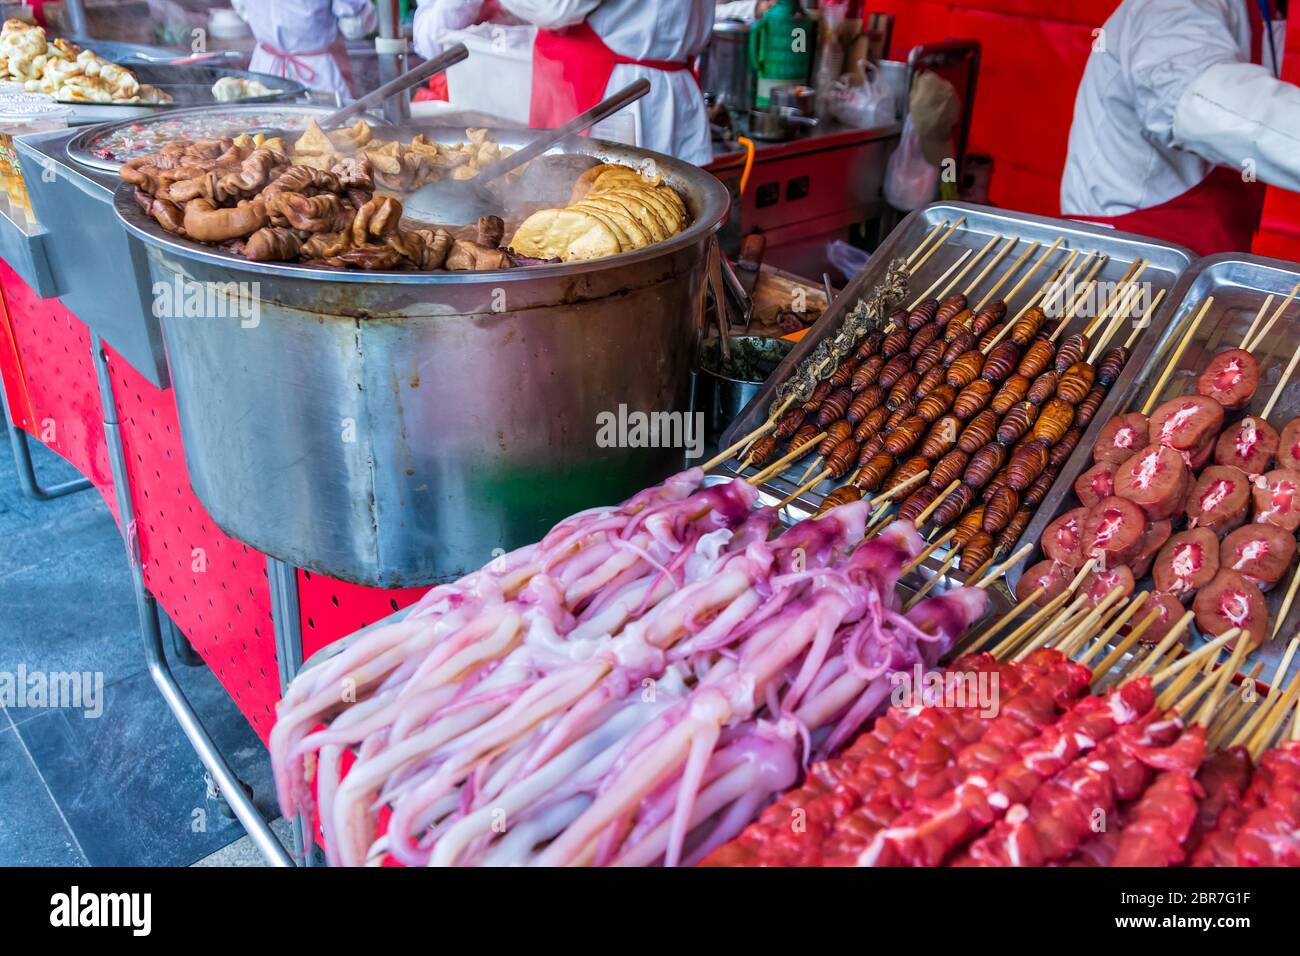 Roasted, fried and raw insects, silkworms, scorpions, bugs, snakes, dog meat, octopus on stick as snack street food in China Stock Photo